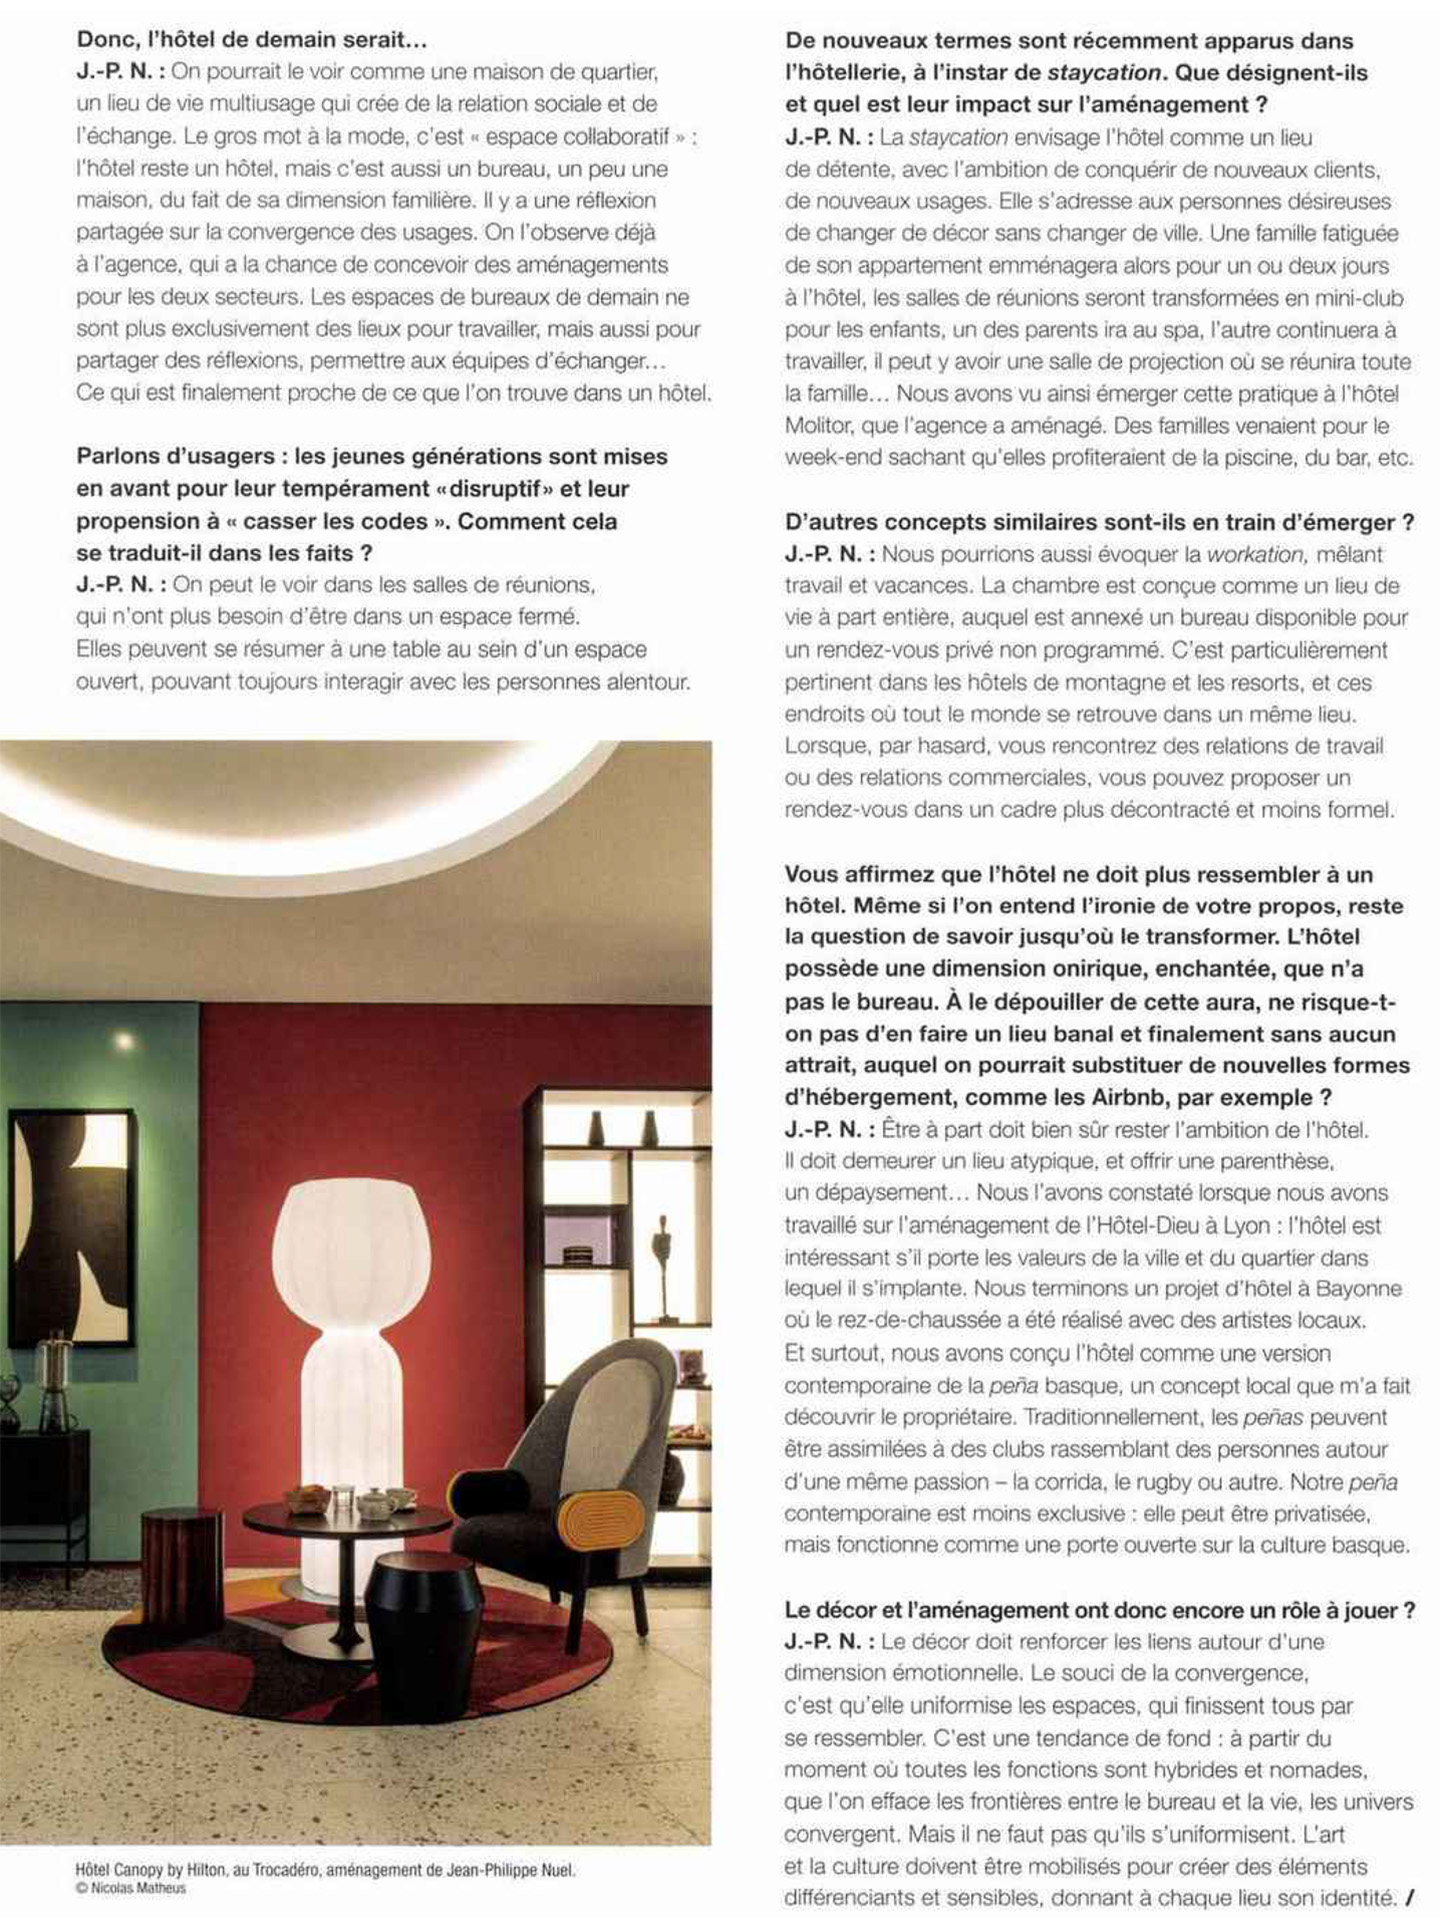 Article in Intramuros about the interior architect and designer jean-philippe nuel and his vision of the hotel industry of tomorrow